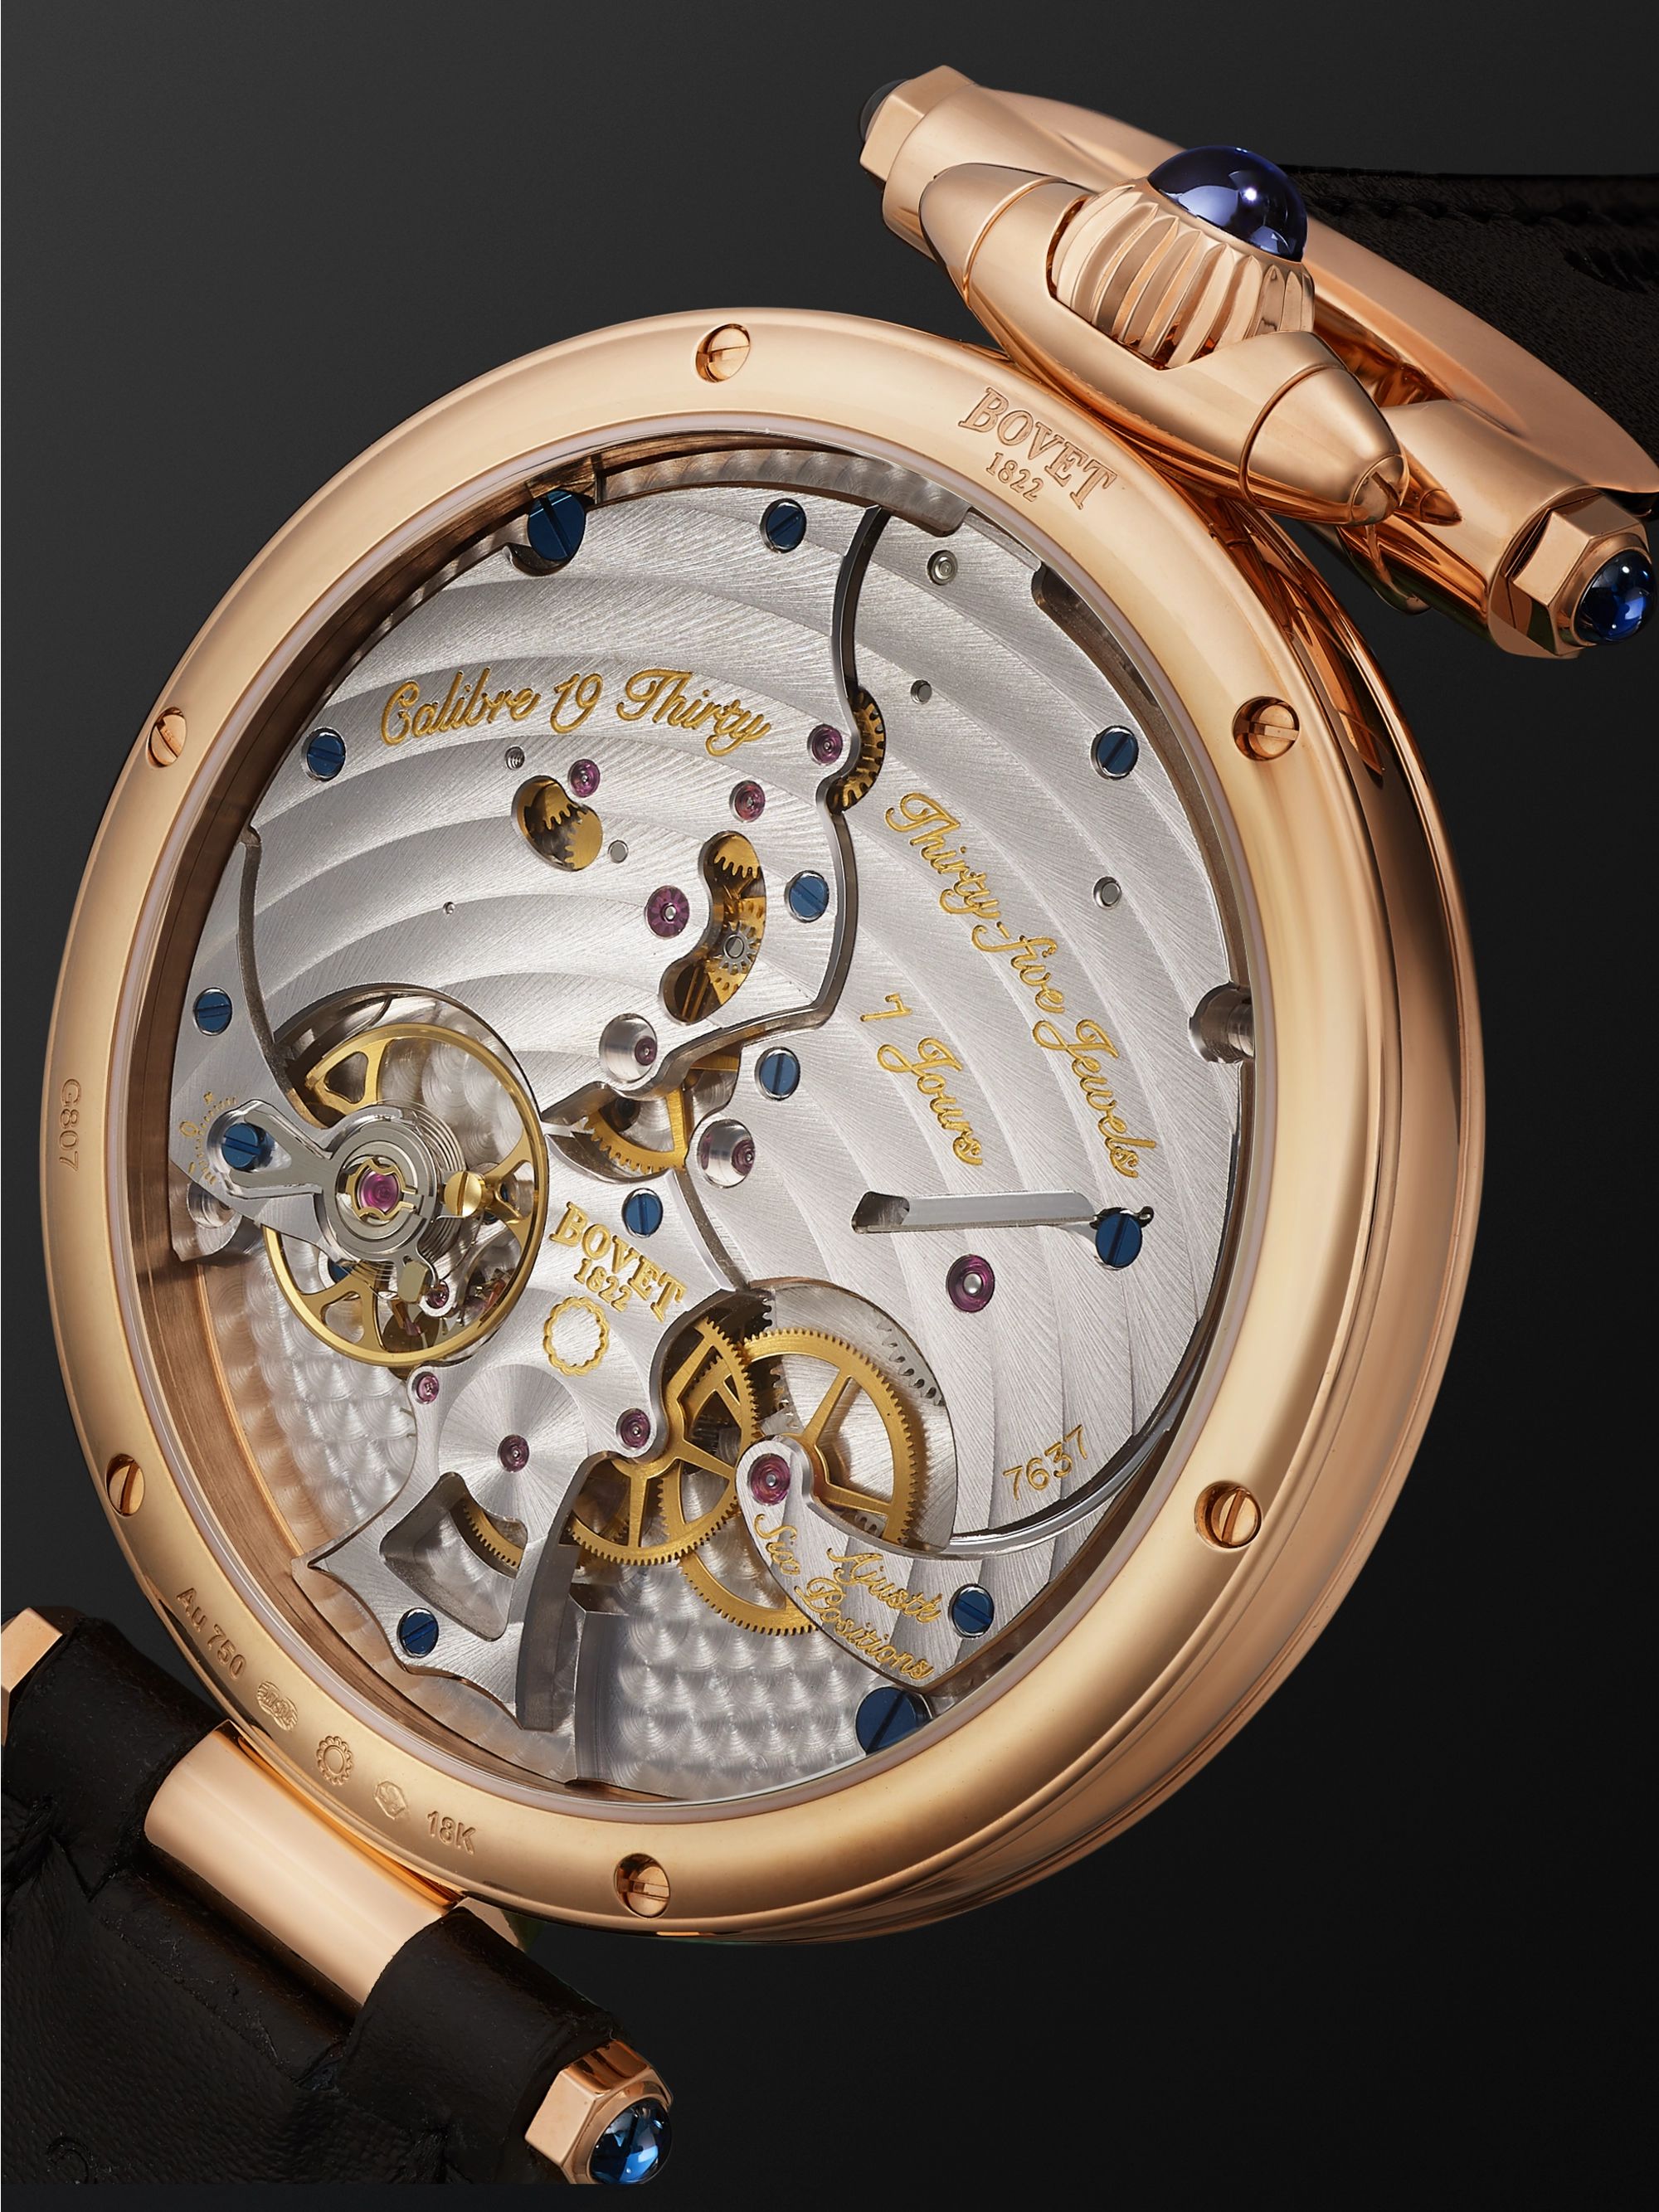 BOVET 19Thirty Fleurier Hand-Wound 42mm 18-Karat Rose Gold and Leather Watch, Ref. No. NTR0029